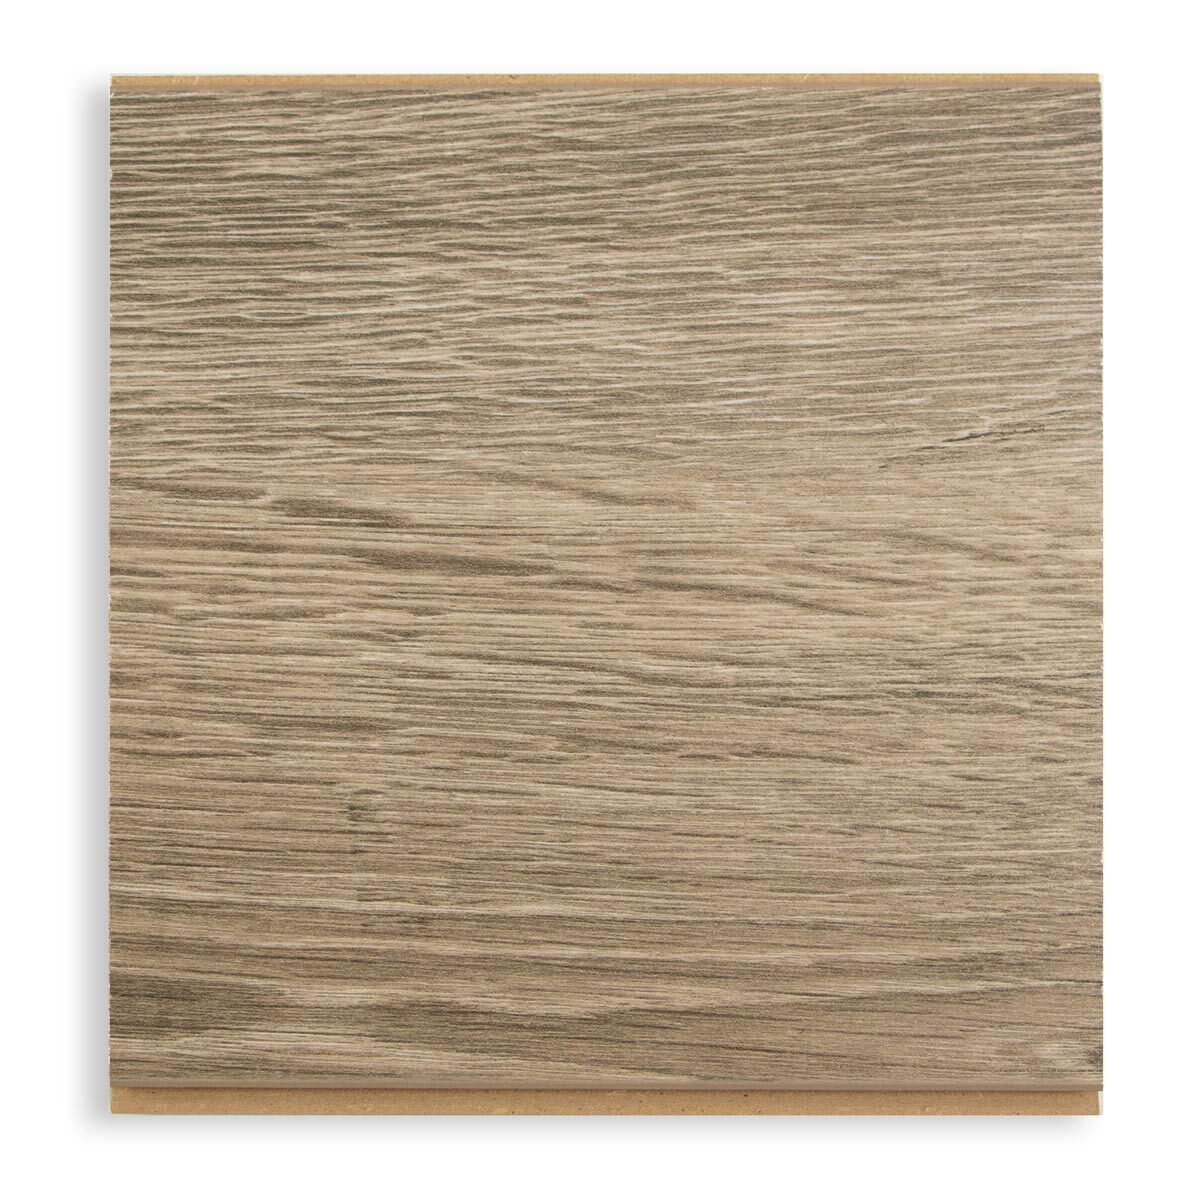 Cut out image of flooring sample